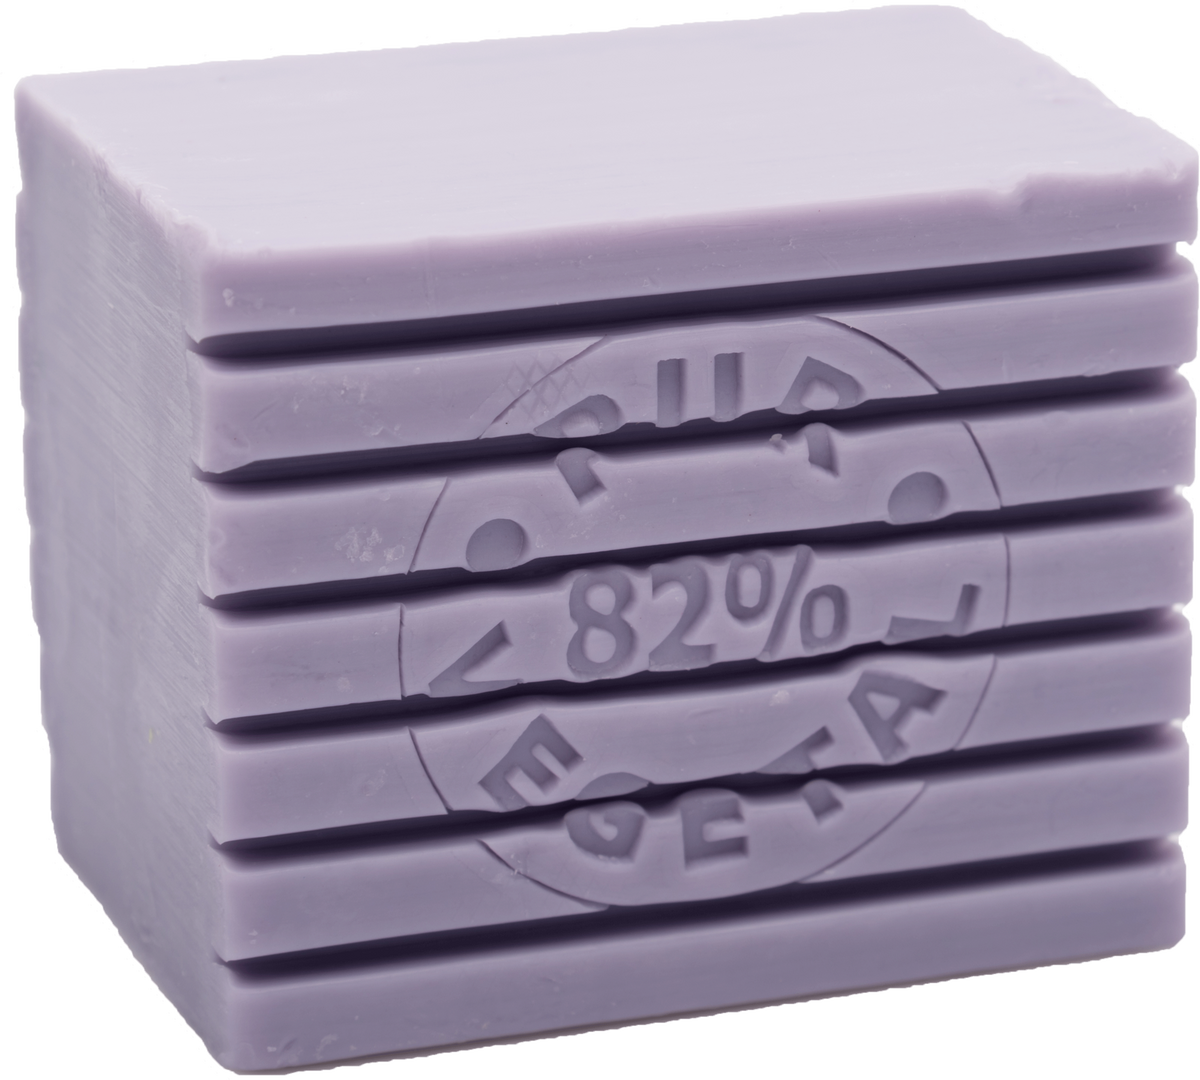 Stack of La Savonnerie de Nyons Lavender Striped Soap bars with "82%" and other inscriptions embossed on them, against a light background.